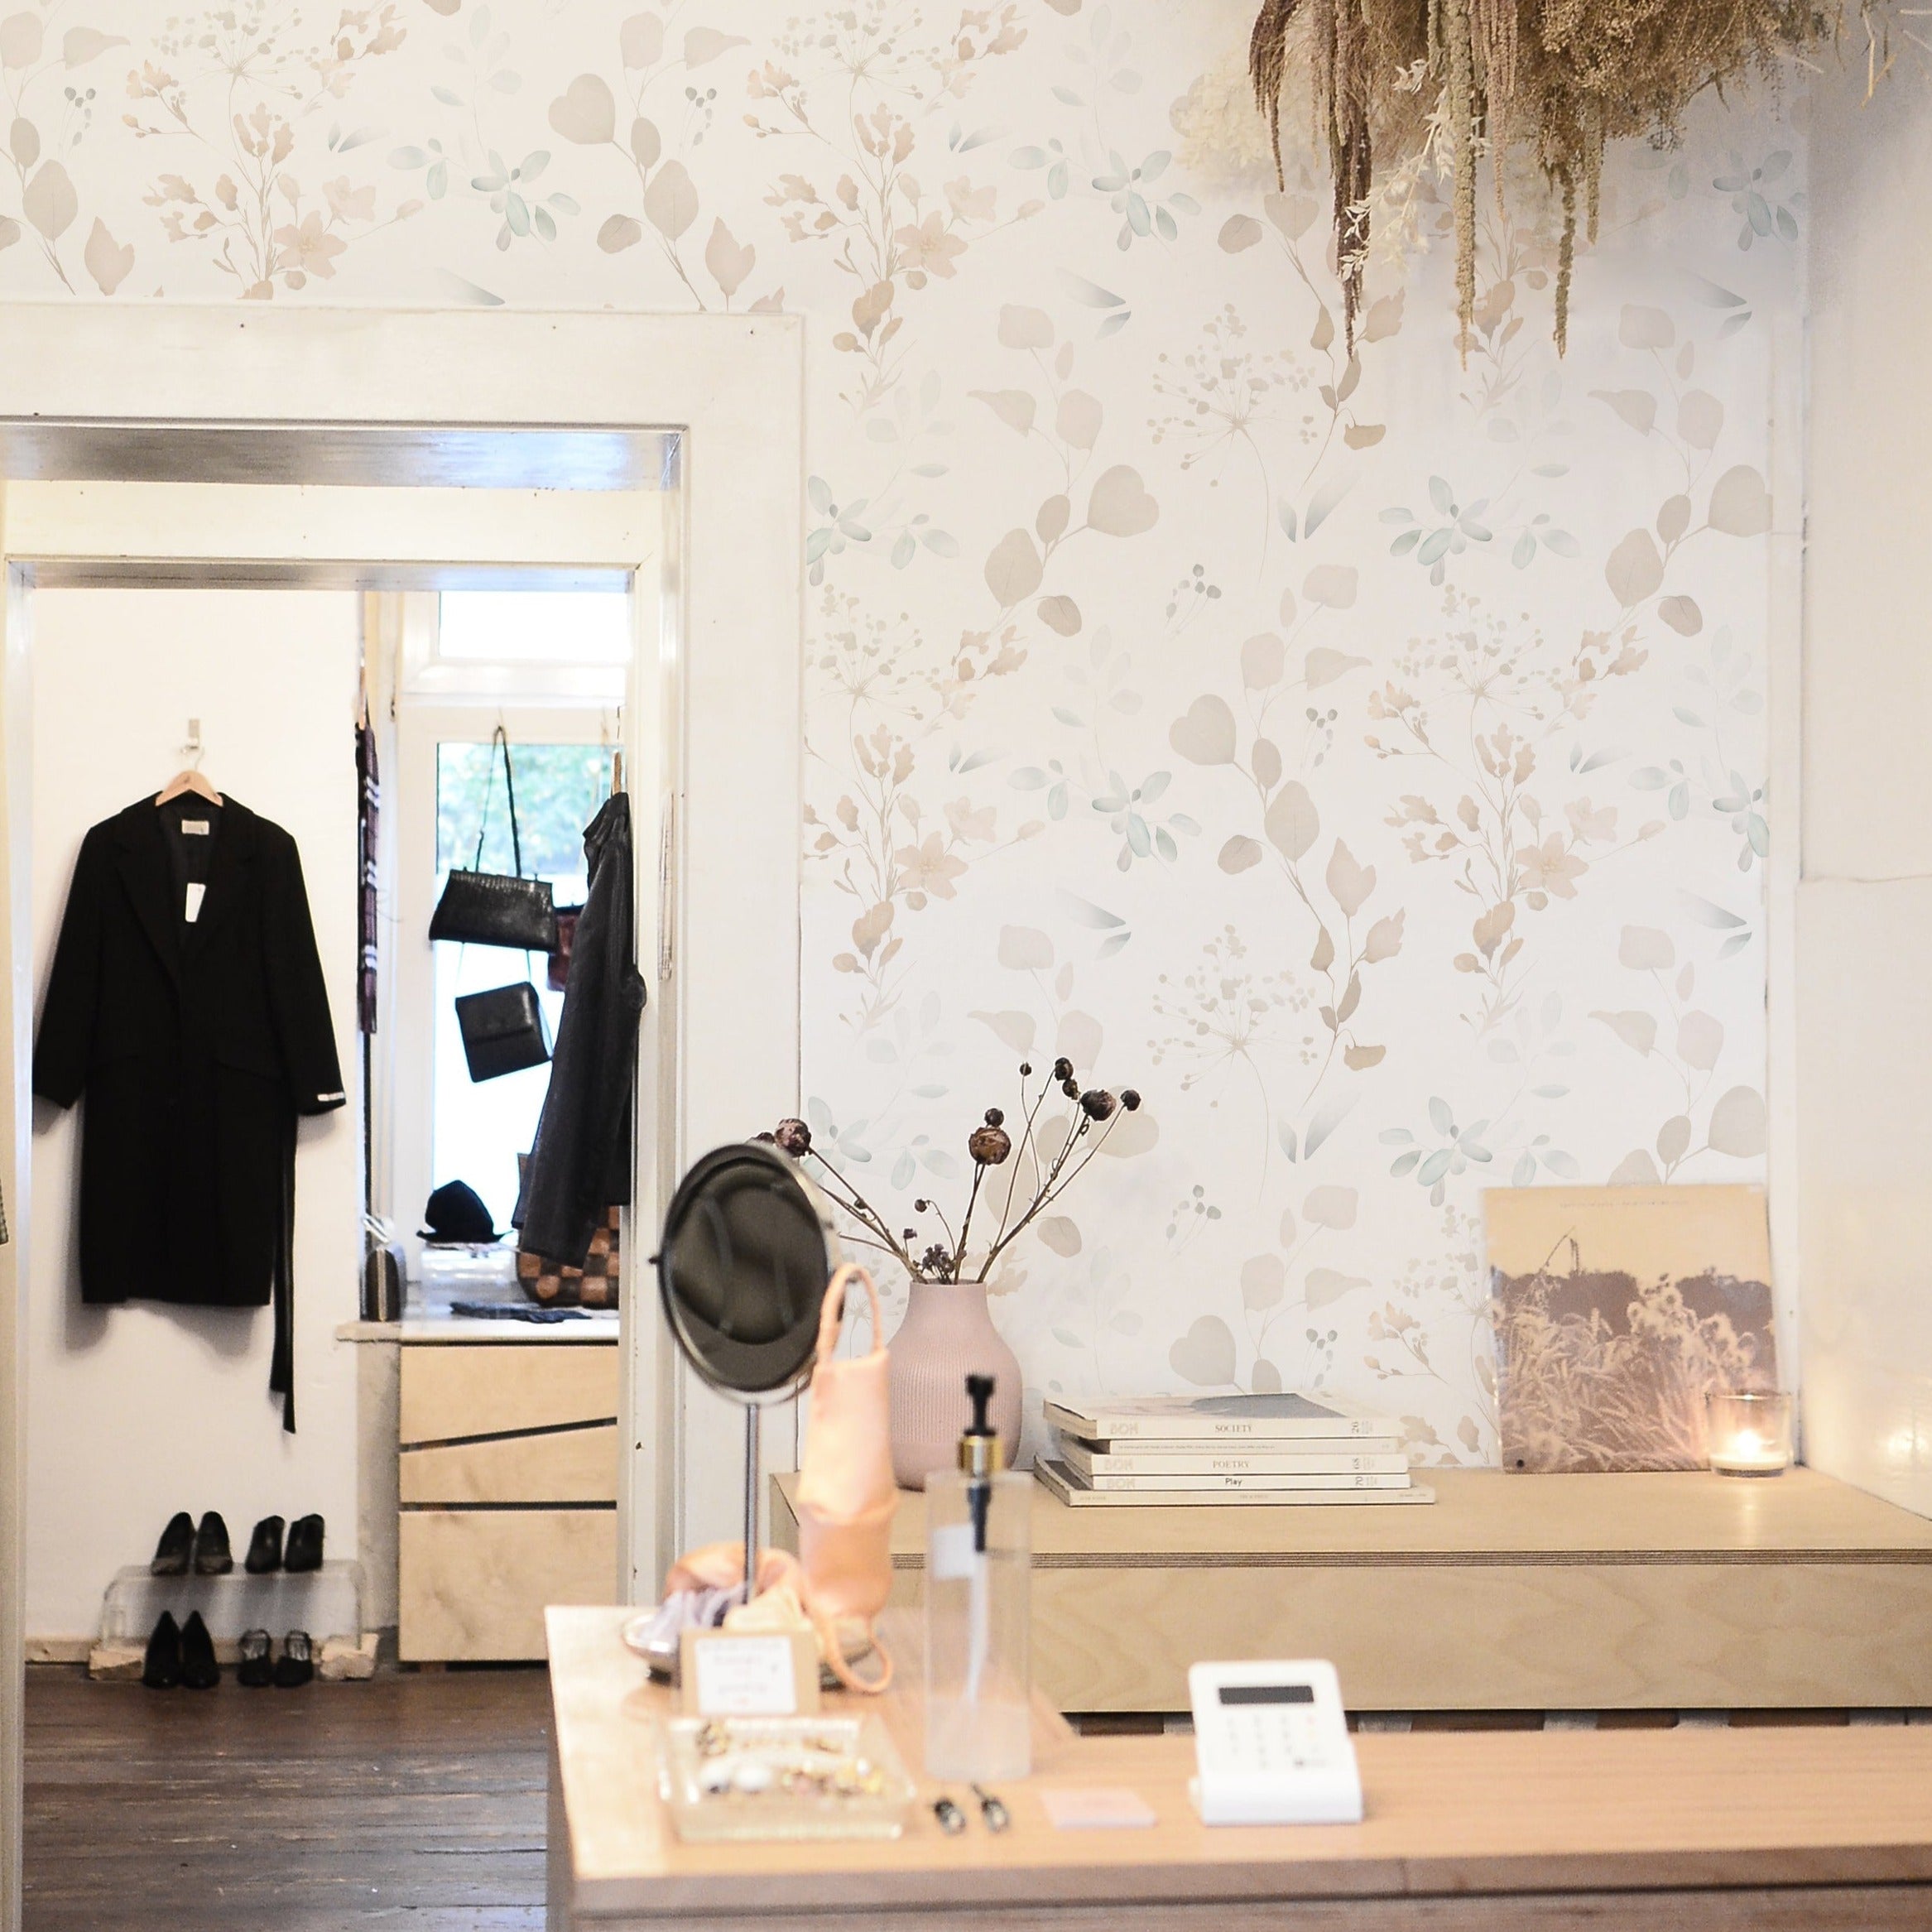 An elegant boutique interior dressed in Watercolour Floral & Herb Wallpaper, complementing the shop's chic decor. The subtle floral pattern serves as a gentle and stylish backdrop to the mirror, clothing rack, and accessories displayed, contributing to a sophisticated shopping atmosphere.